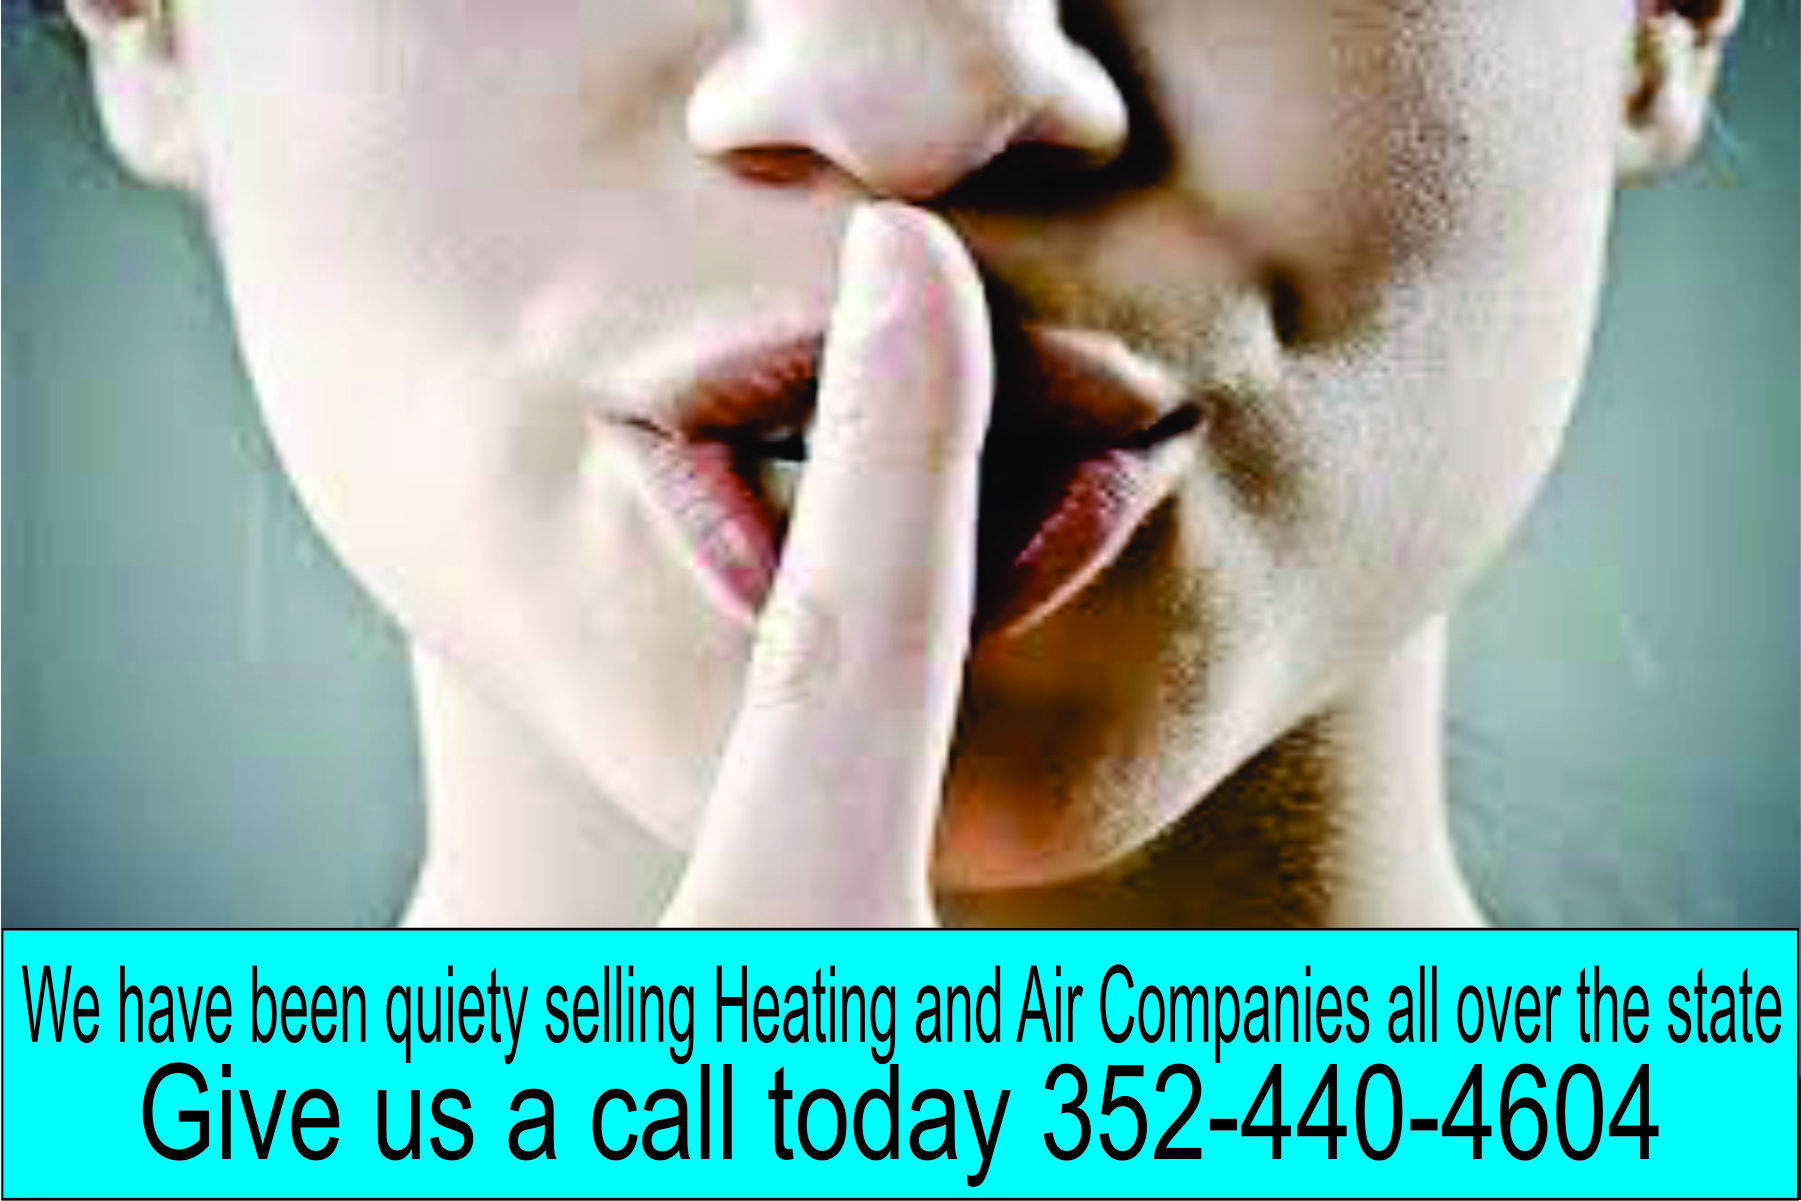 Why Confidentiality Is Key When Selling Your HVAC or Plumbing Company